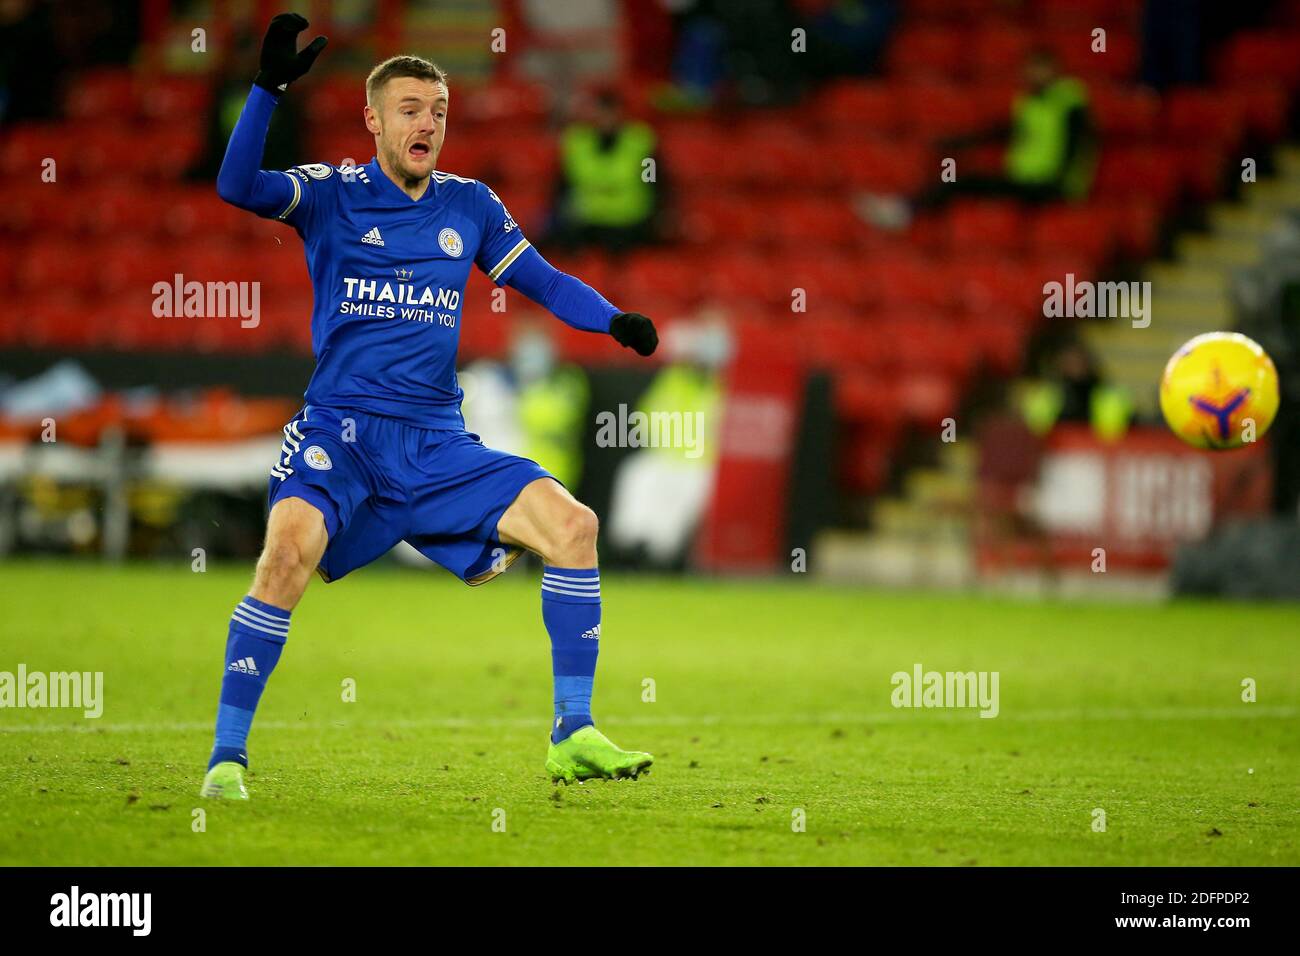 SHEFFIELD, ENGLAND. DECEMBER 6TH Leicesters Jamie Vardy shoots and scores to make it 2-1 during the Premier League match between Sheffield United and Leicester City at Bramall Lane, Sheffield on Saturday 5th December 2020. (Credit: Chris Donnelly | MI News) Credit: MI News & Sport /Alamy Live News Stock Photo